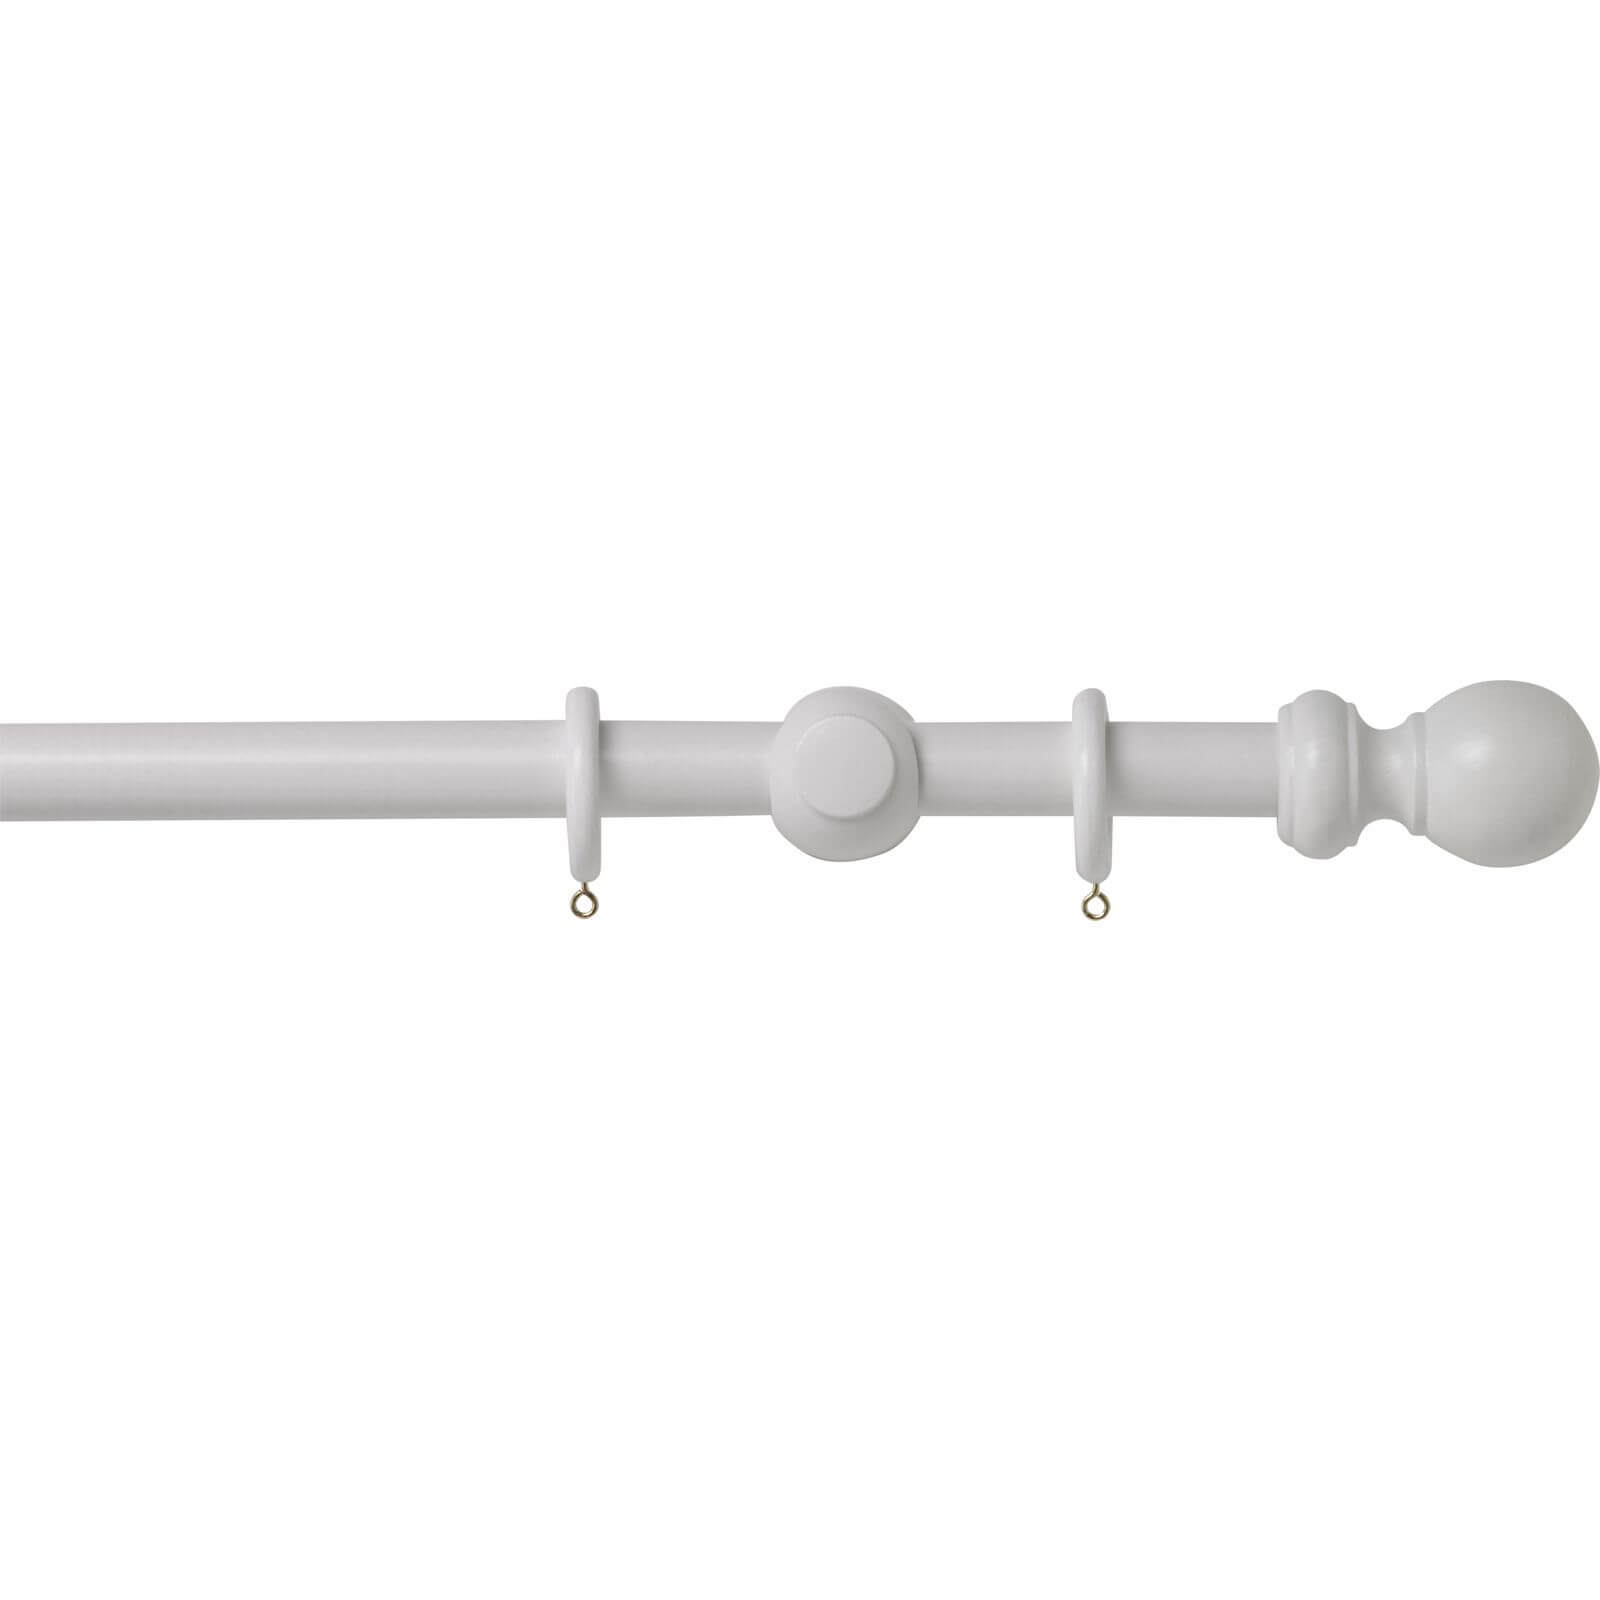 Photo of White Wood 28mm Curtain Pole With Ball Finials - 3m